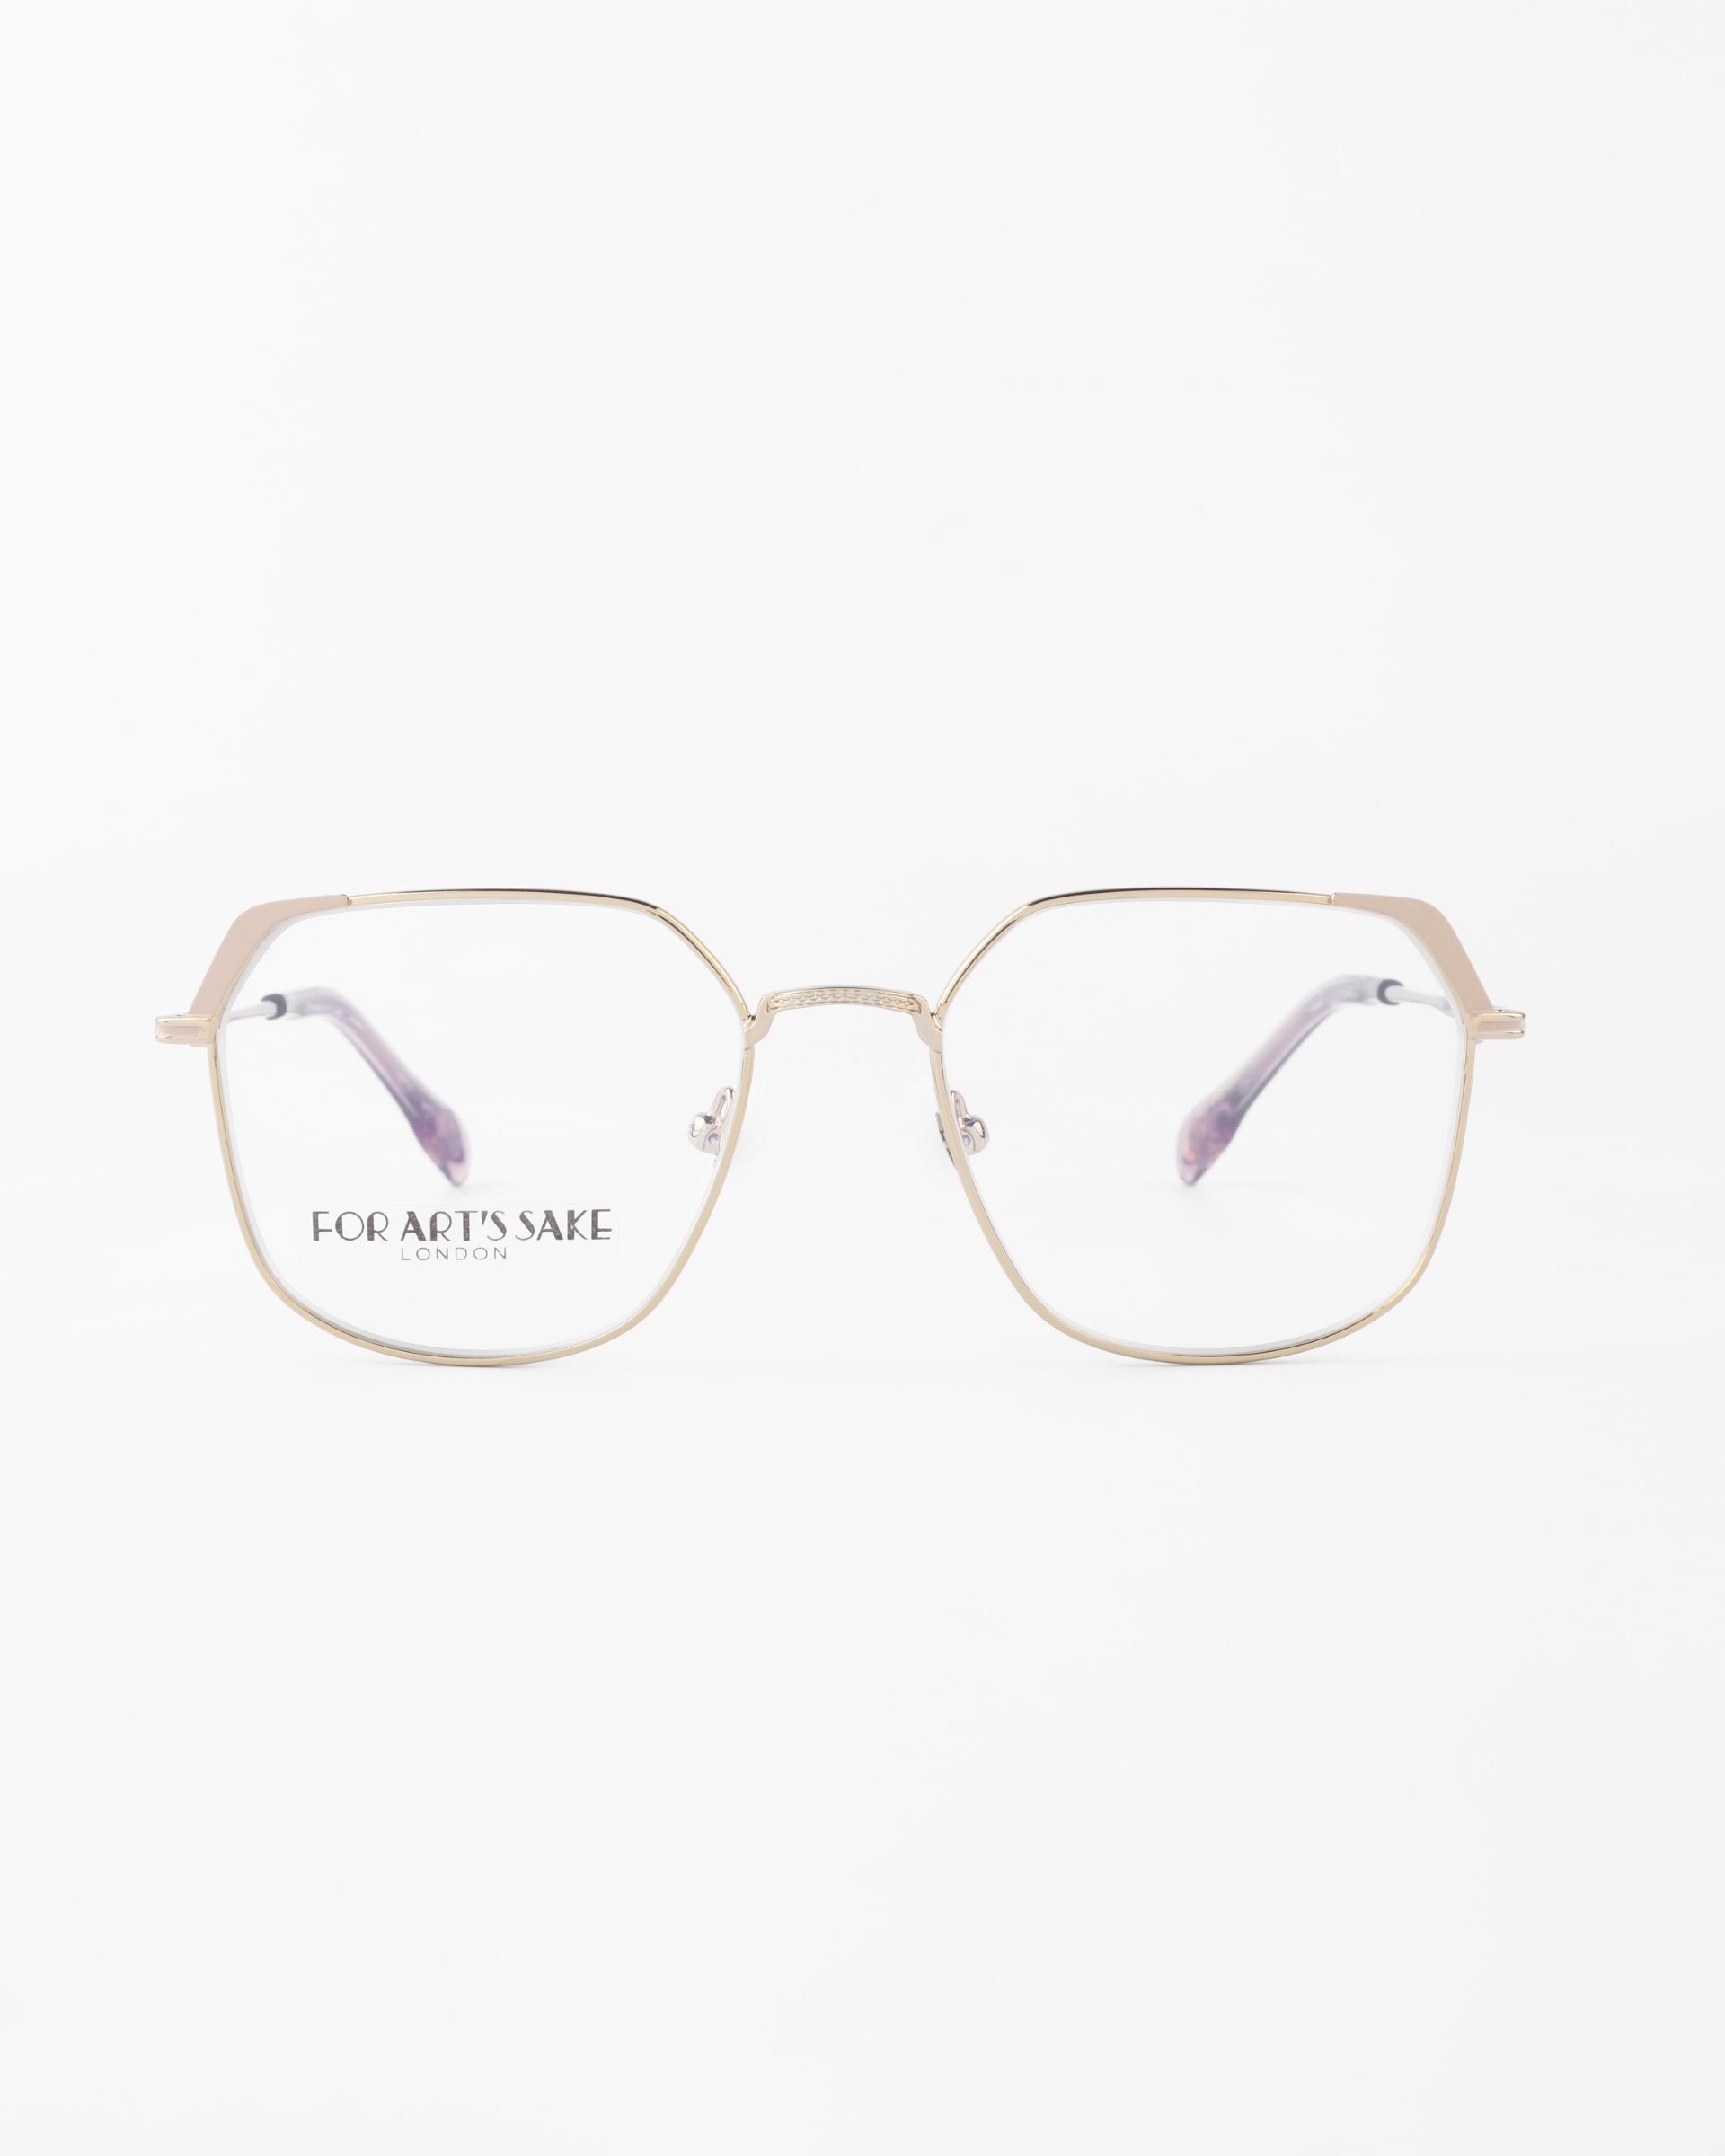 Close-up of gold-framed eyeglasses with hexagonal-shaped lenses and clear nose pads. The arms curve gracefully and feature a pale pink gradient. "For Art's Sake®" is printed on the left lens, offering both style and blue light filter for optimum eye comfort. The background is white.